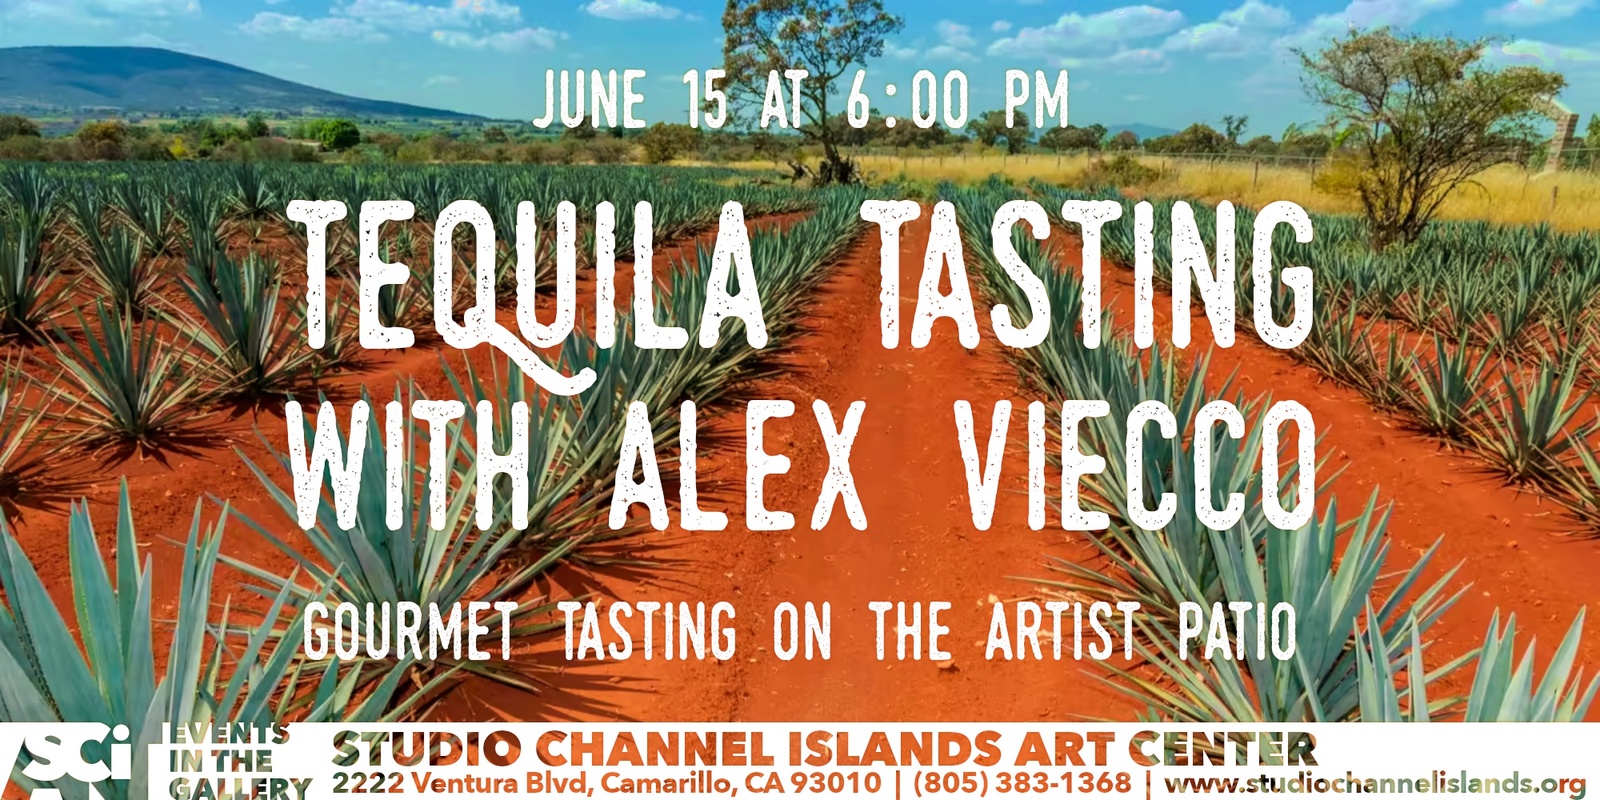 Banner image for Gourmet Taco & Tequila Tasting with Alex Viecco